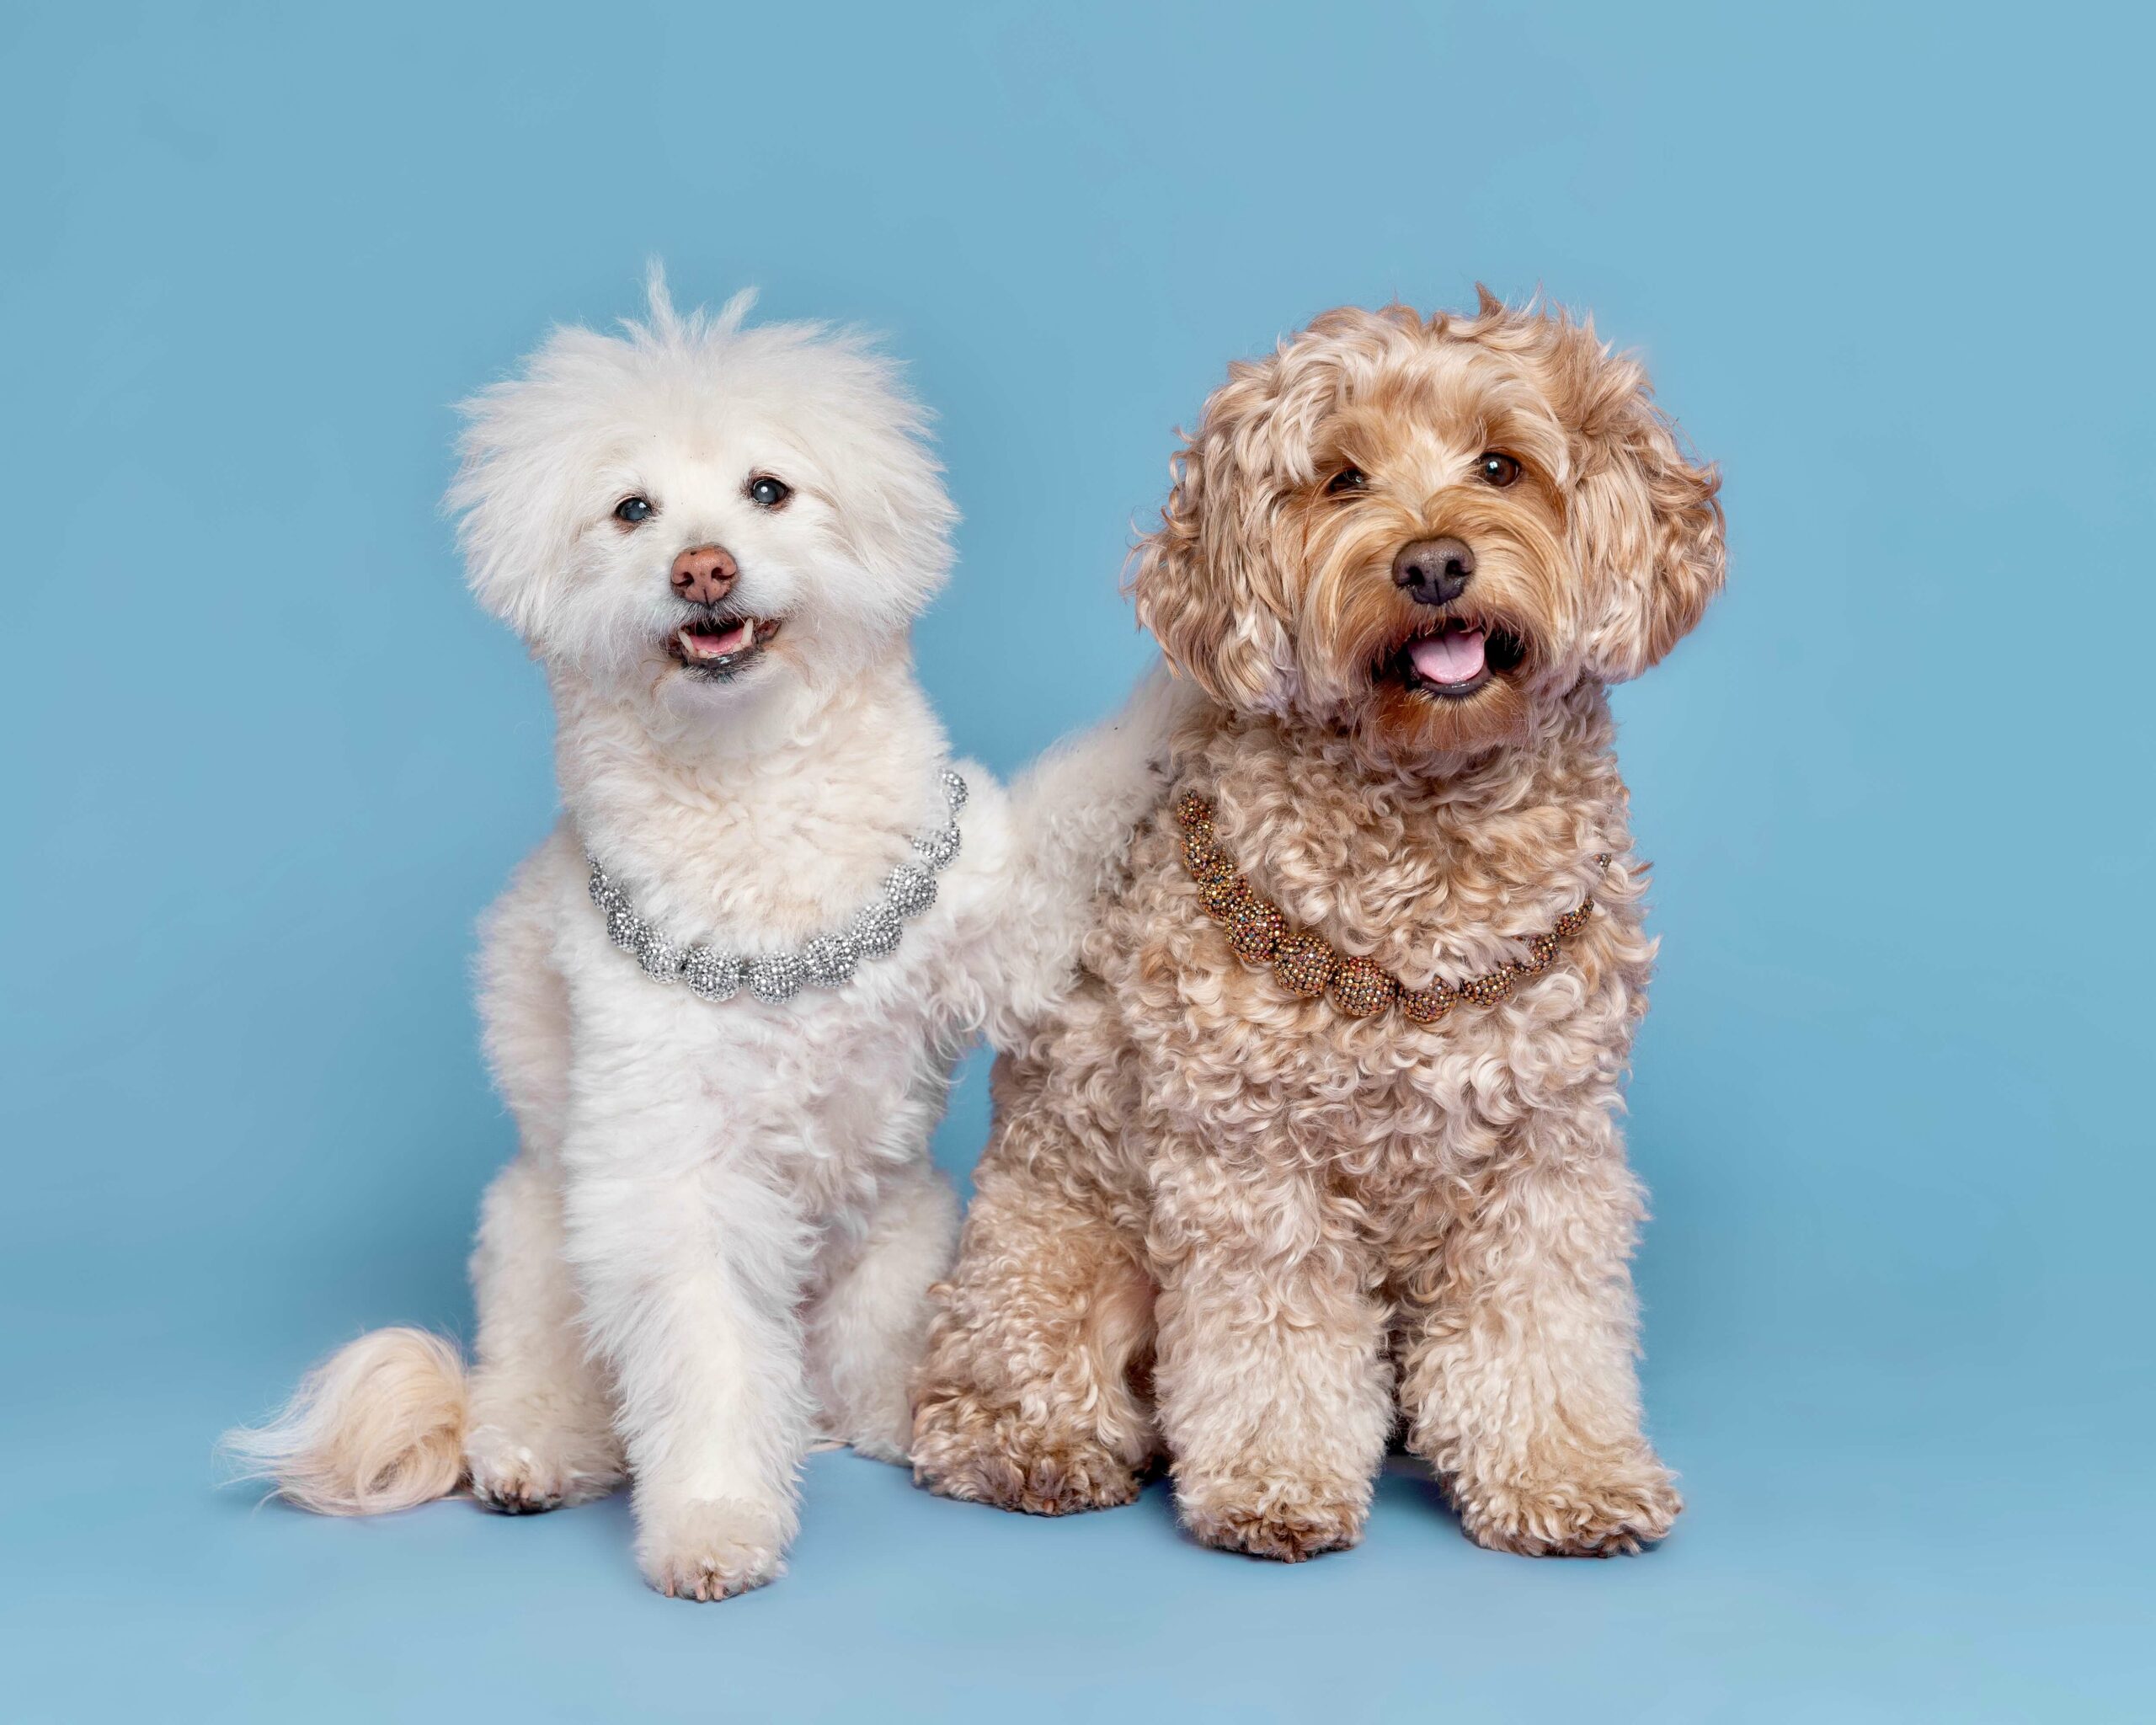 Best Local Pet Care Services in Los Angeles – from vets to groomers to pet photographers.